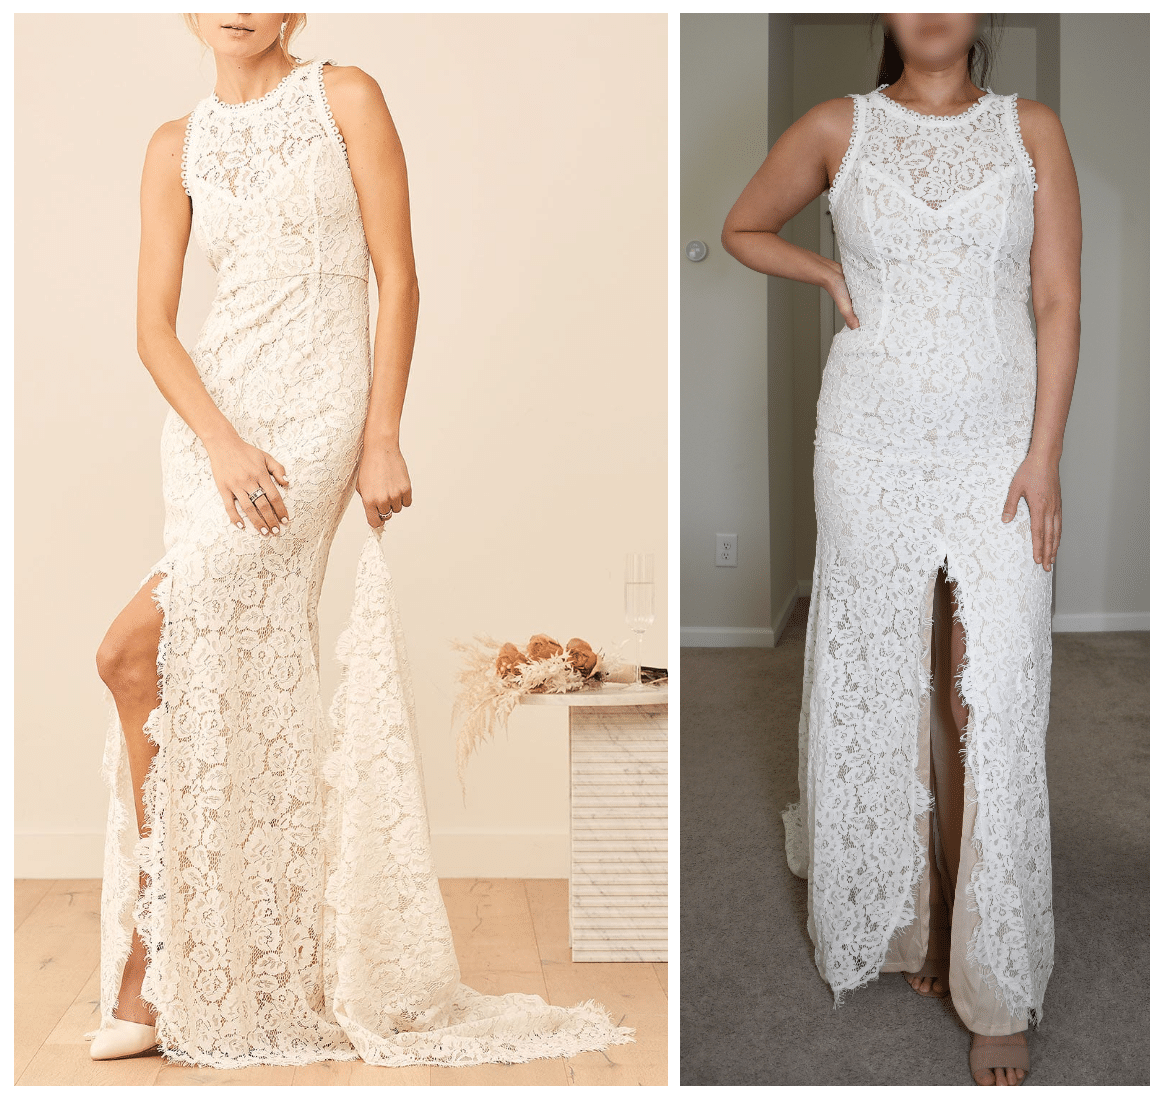 lulus white and nude wedding dress comparison